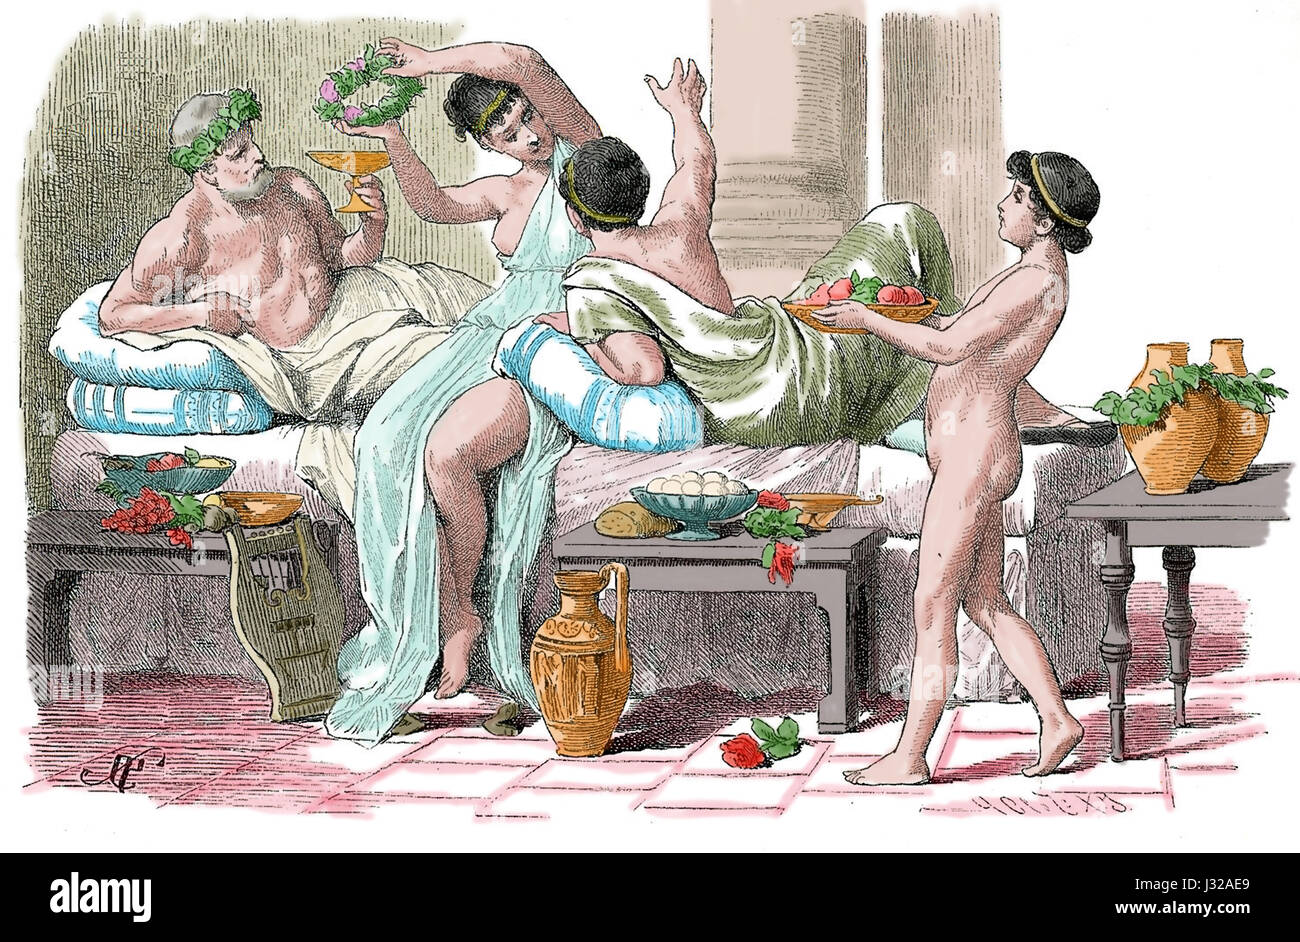 Ancient Greek. Banquet with a courtesan. Engraving, 19th century. Stock Photo